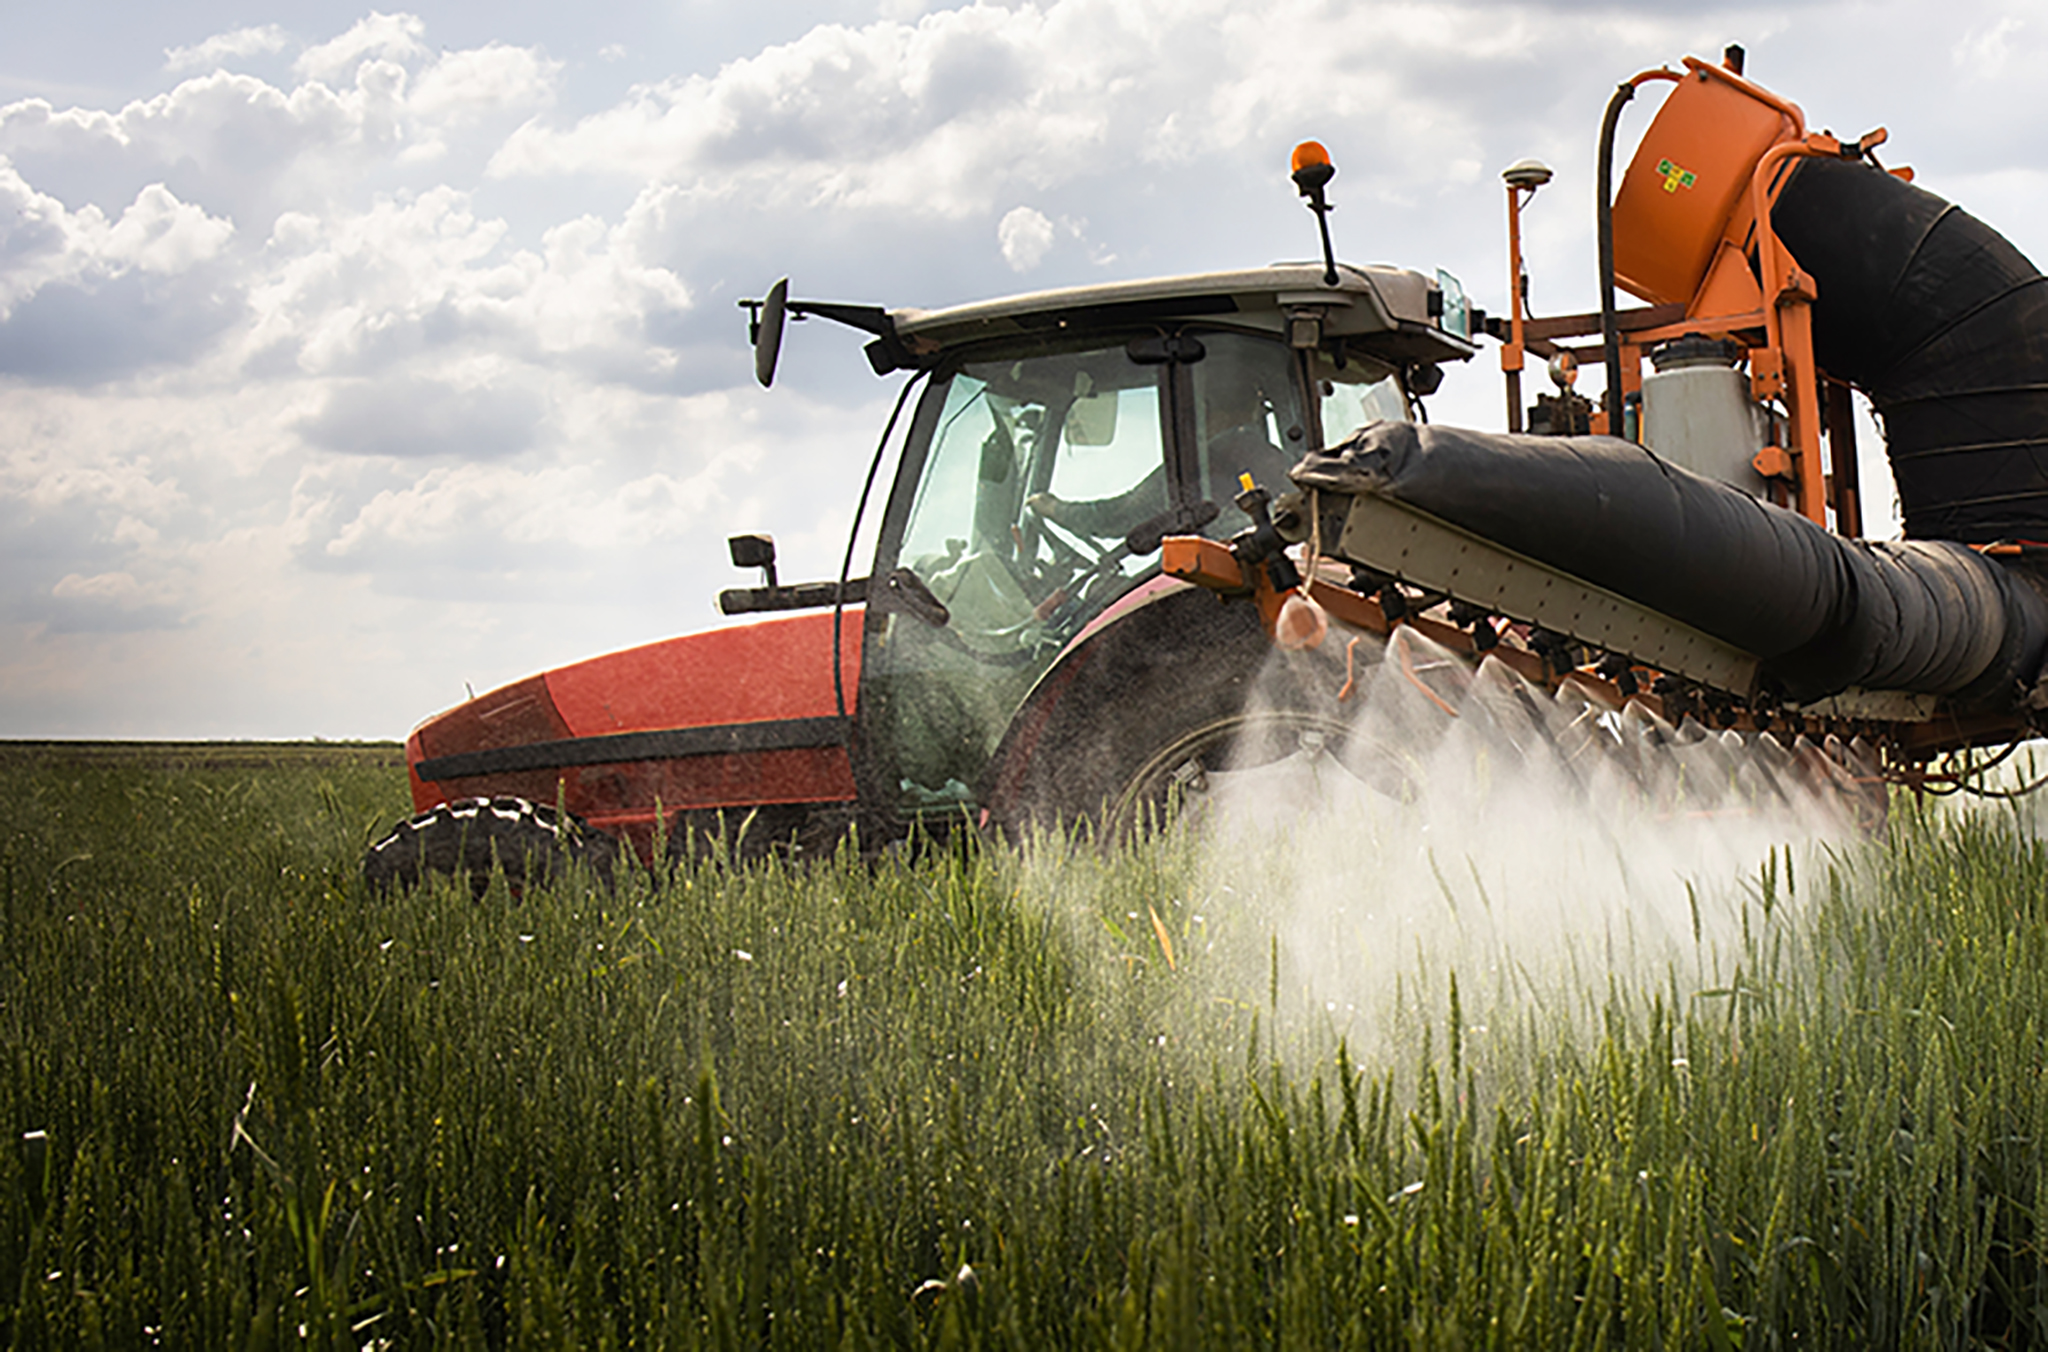 Tractor-spraying-pesticide-over-crops-2048x1352